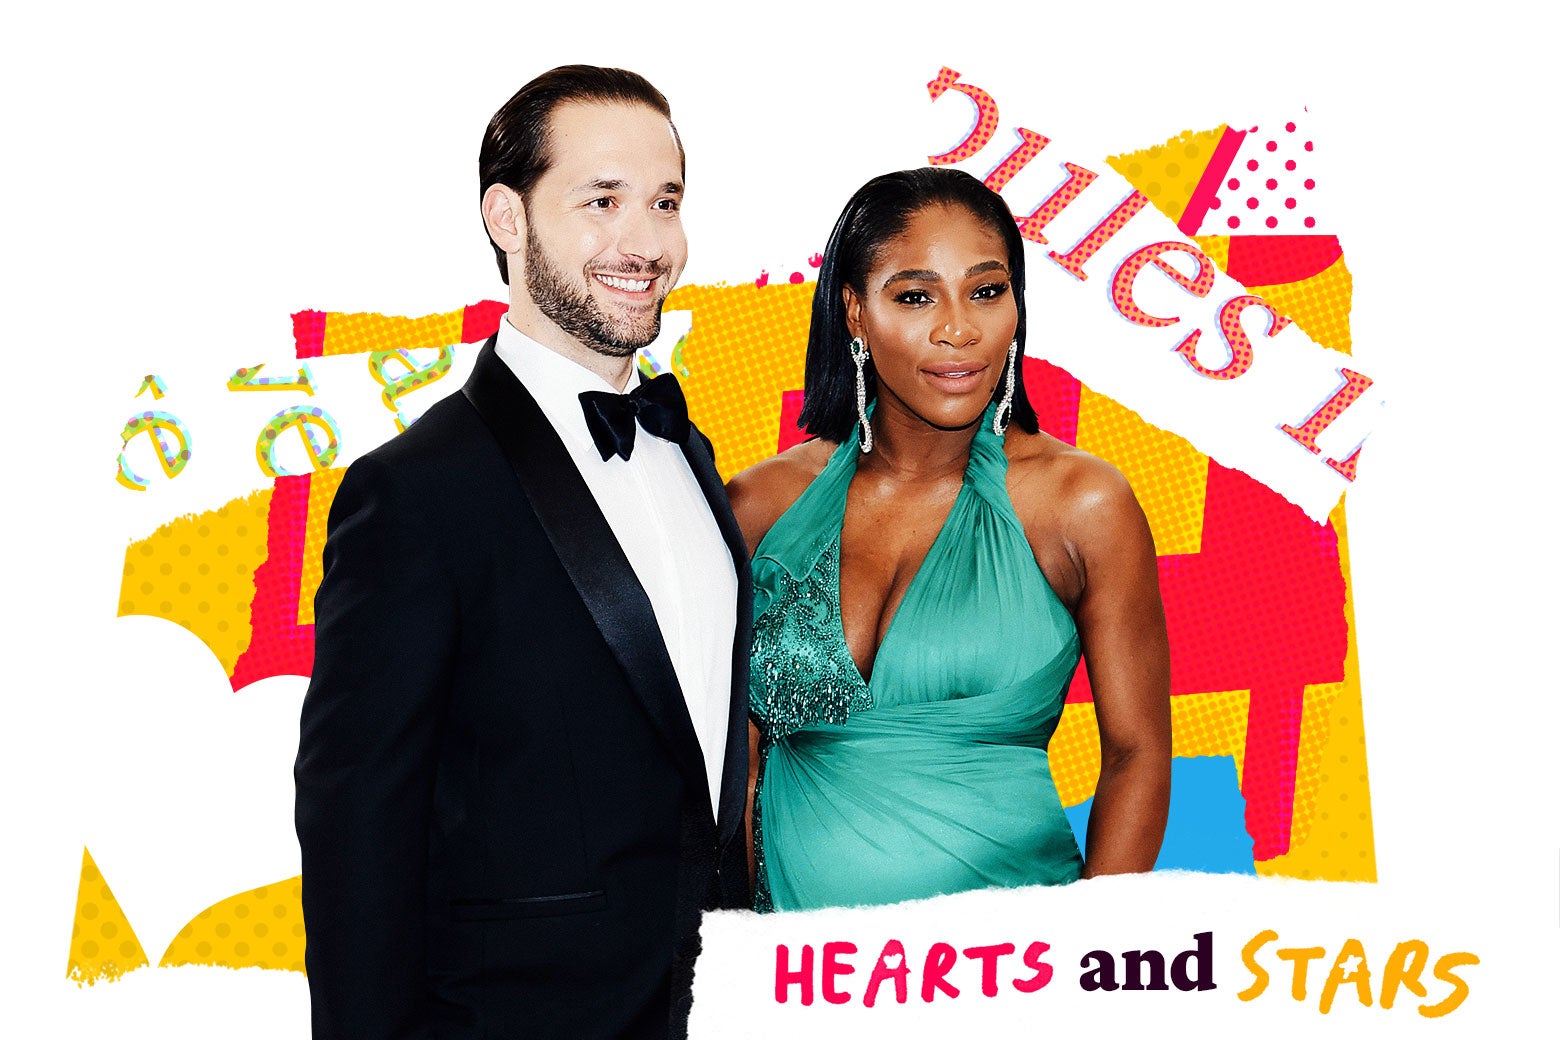 Alexis Ohanian and Serena Williams with text and hearts and Hearts and Stars logo